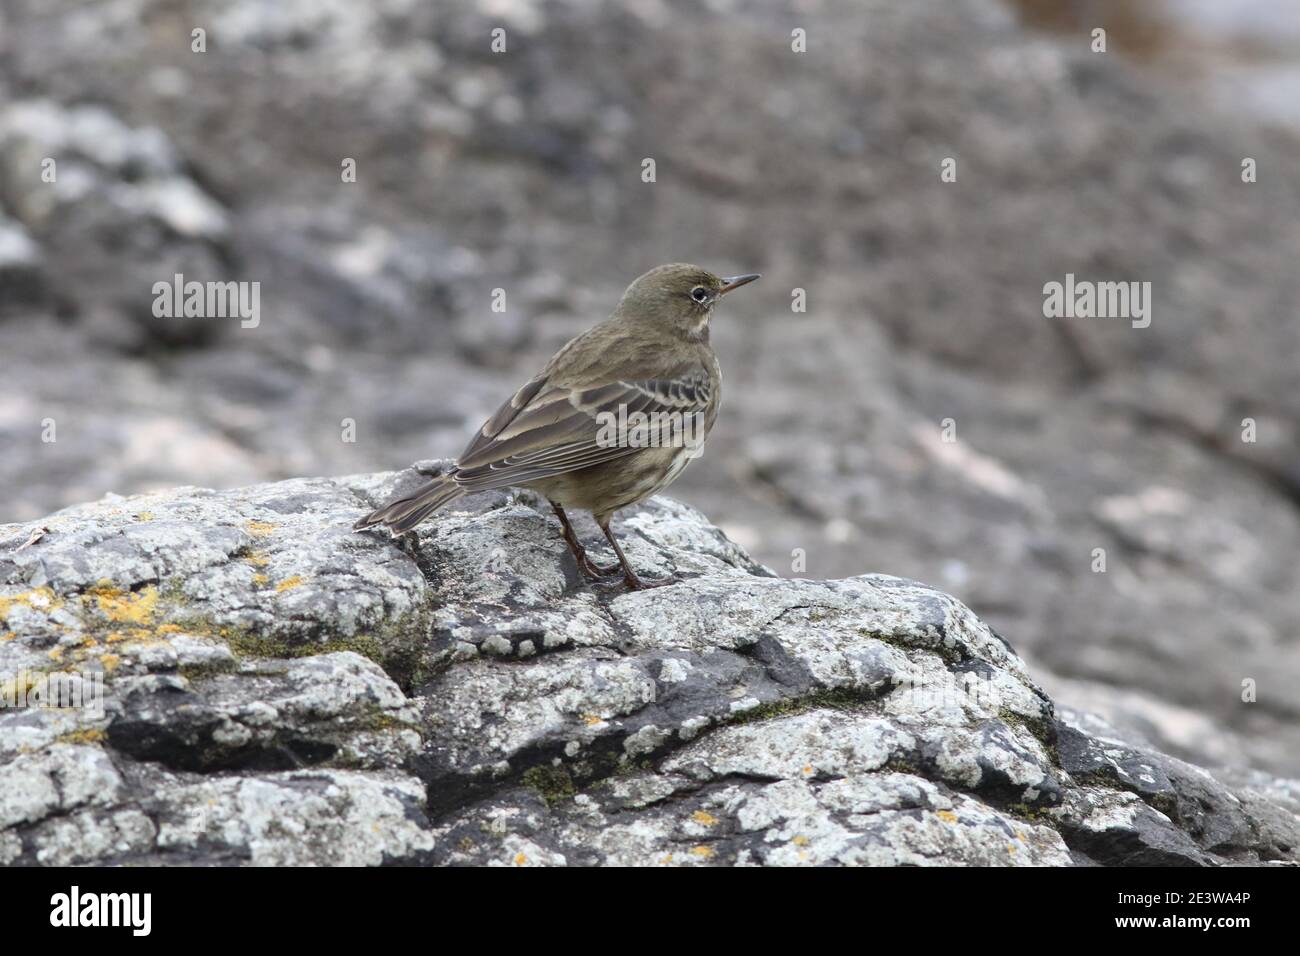 Anthus petrosus, Rock Pipit, this coastal bird standing here on a rock, in a natural mono colour scenery, of a grey concept, of wildlife on a beach. Stock Photo